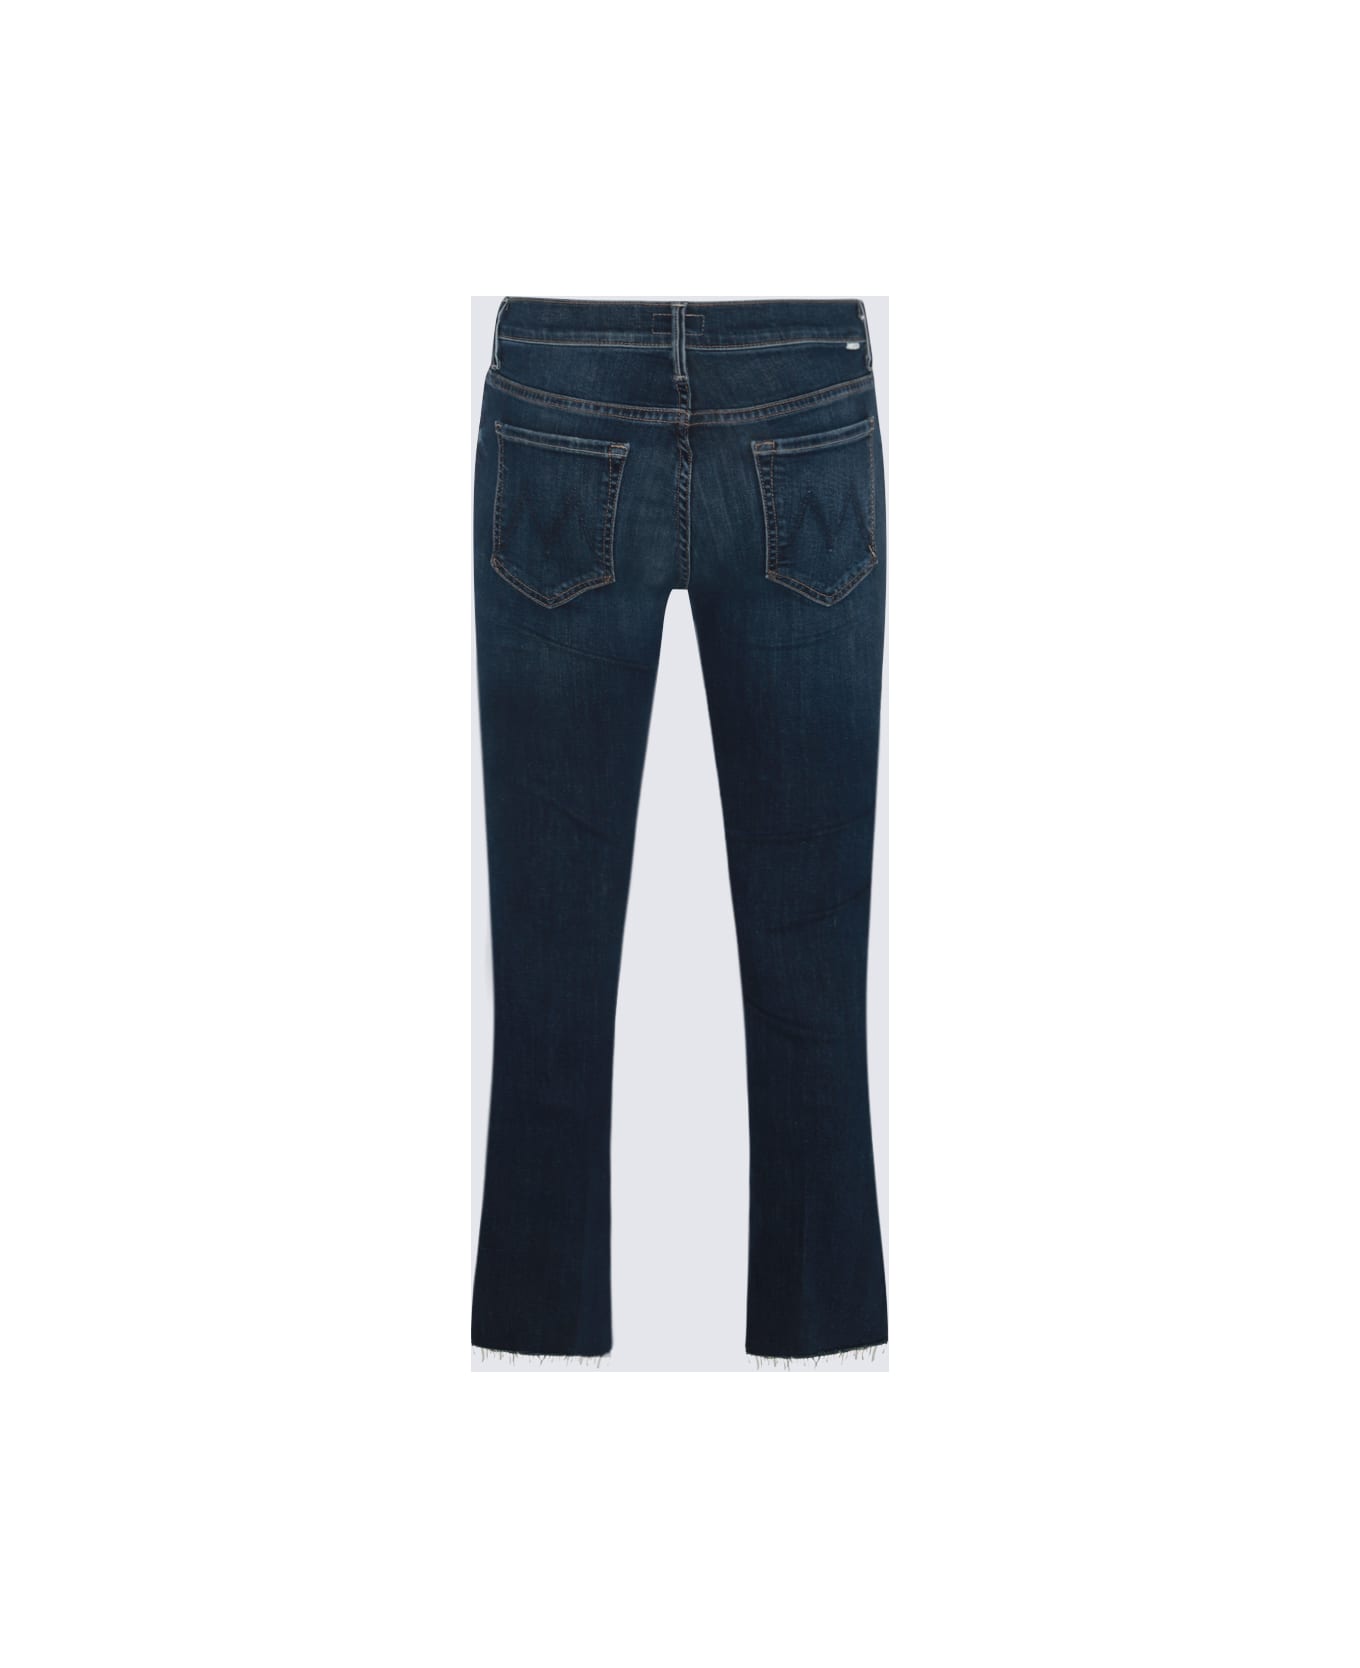 Mother Teaming Up Denim And Cotton Blend Jeans - TEAMING UP